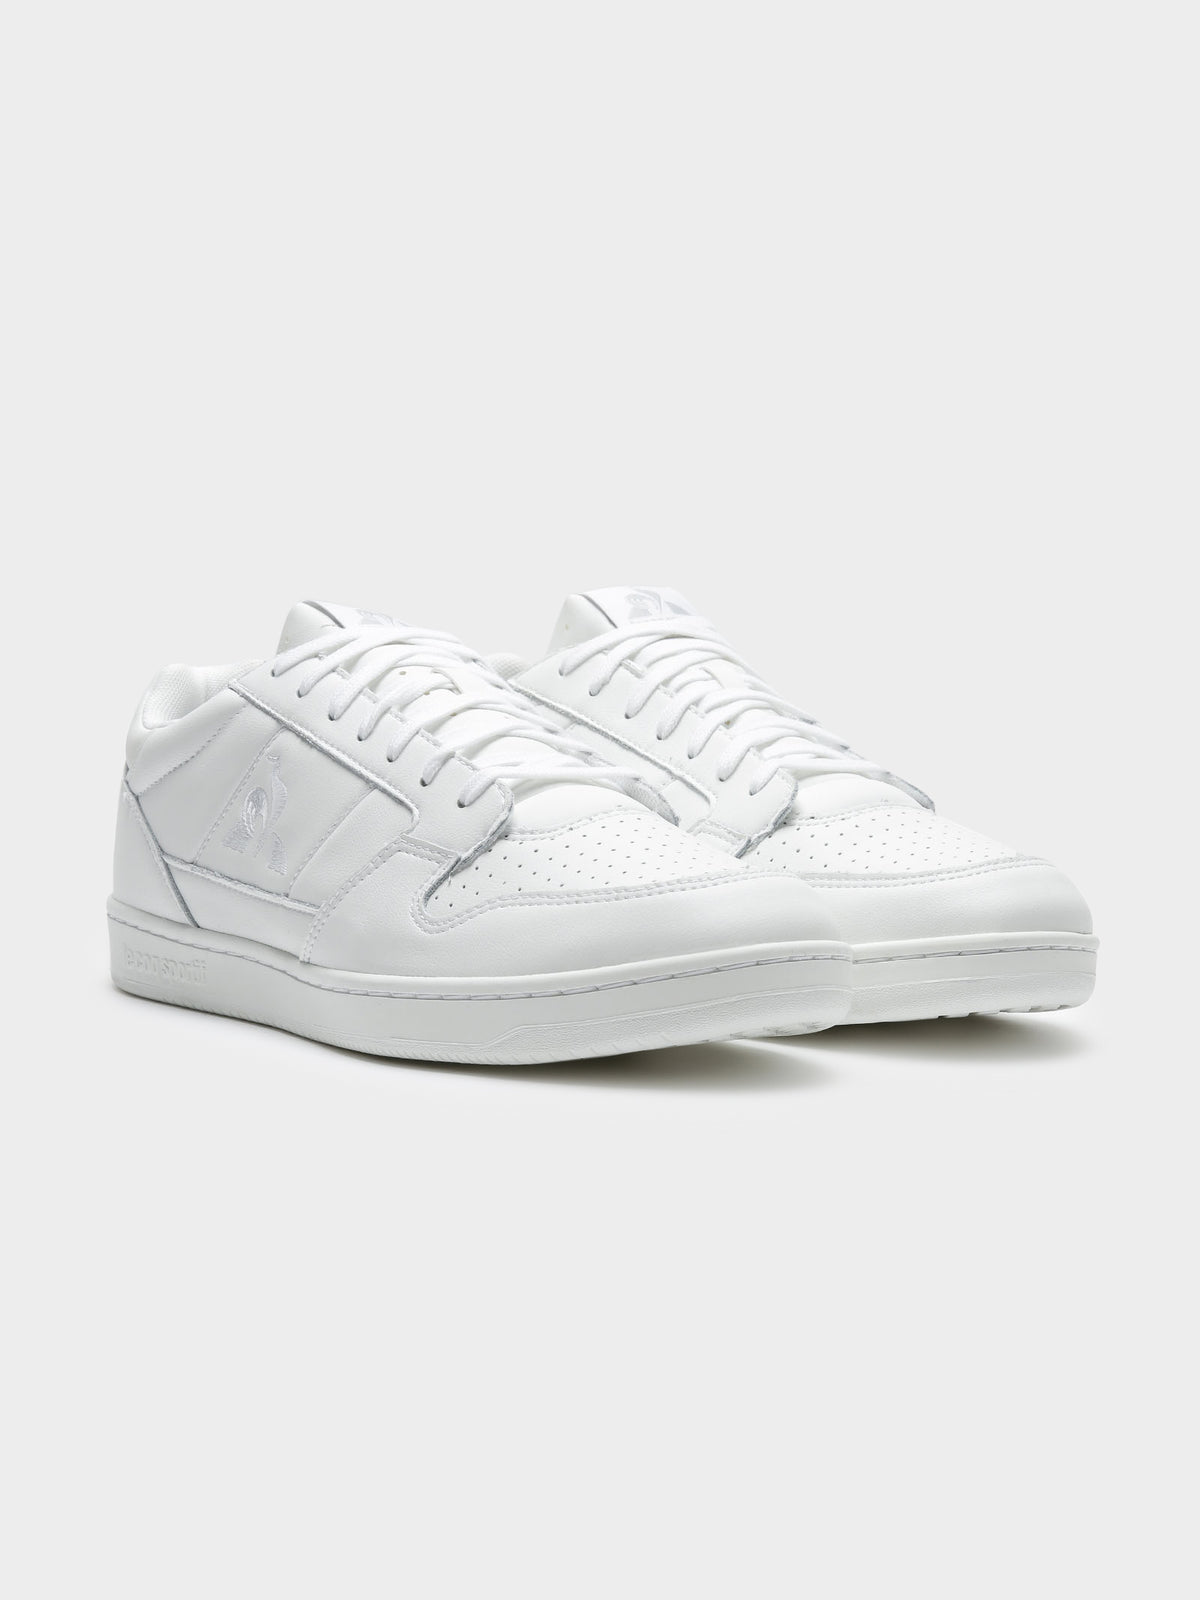 Mens Breakpoint Sneakers in Optical White